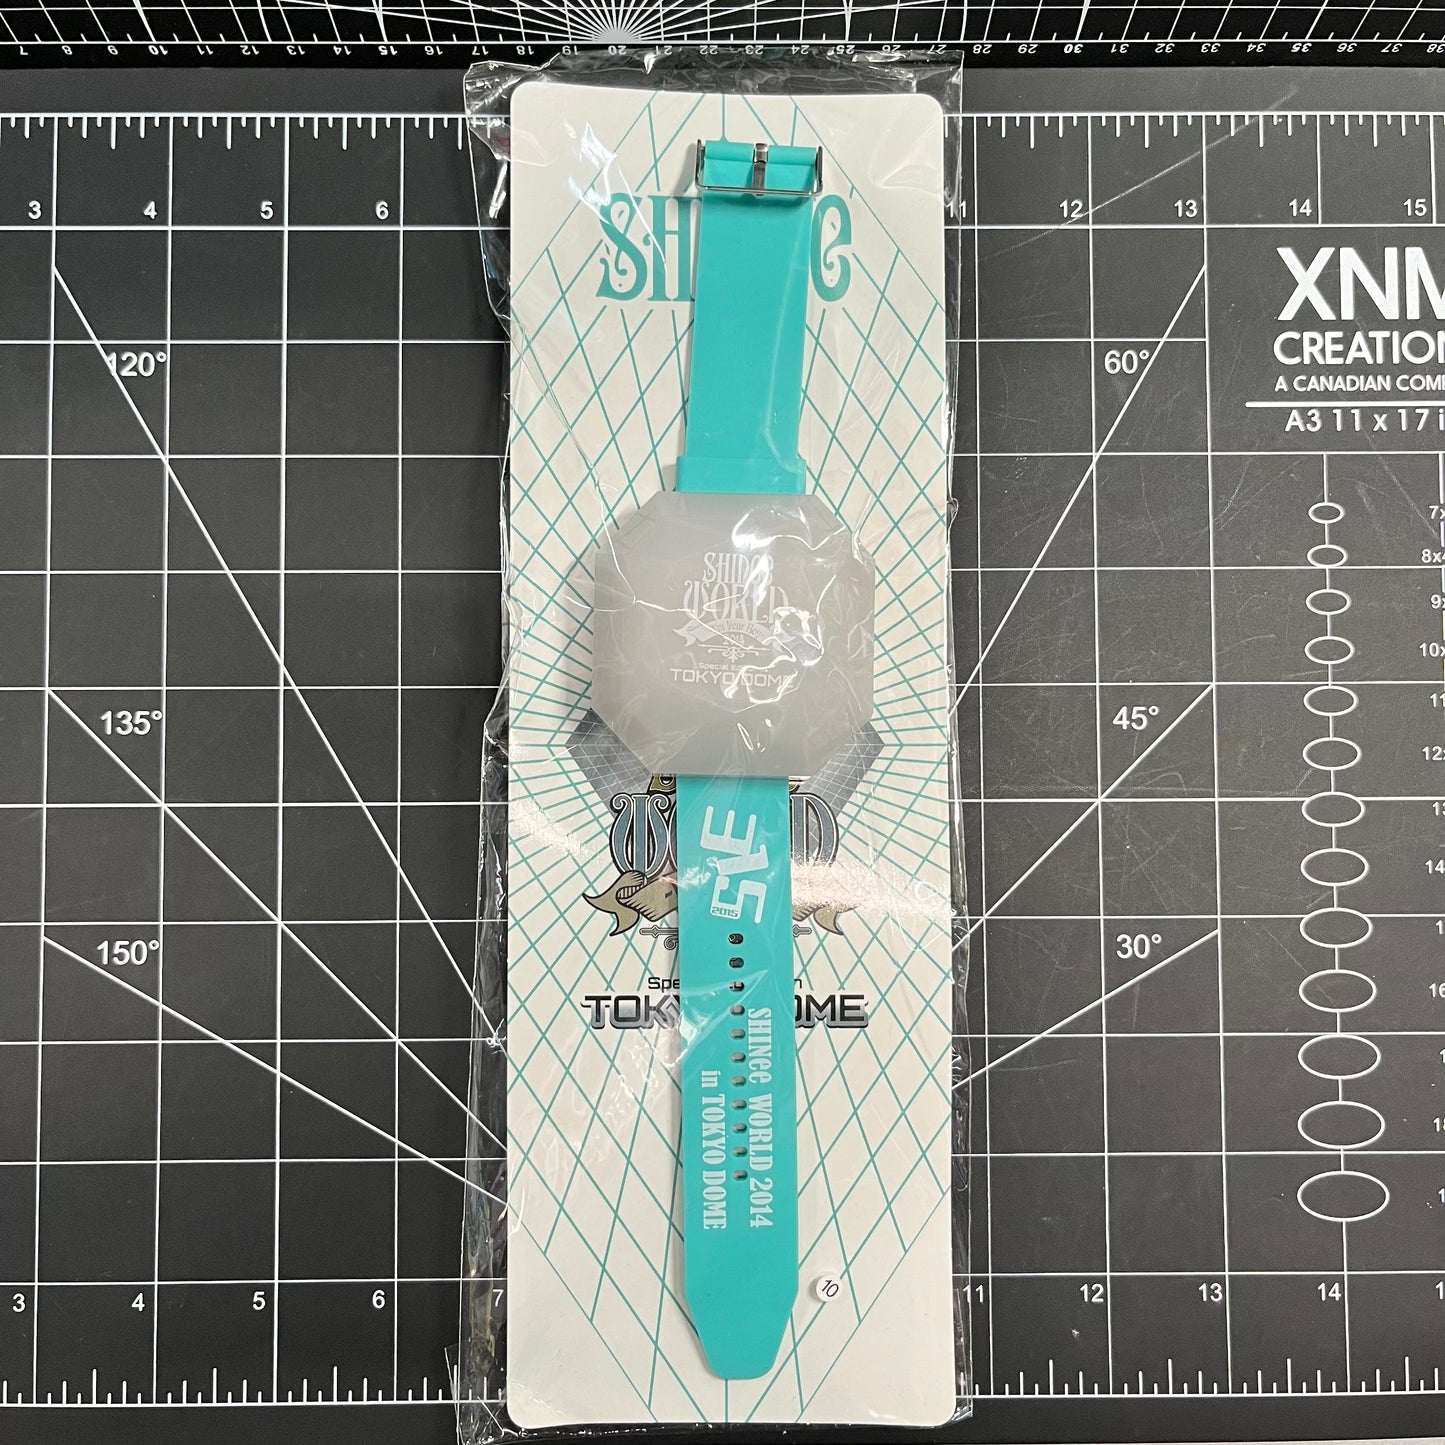 SHINee World I'm Your Boy 2014 in Tokyo Dome - Watch Type Light Stick